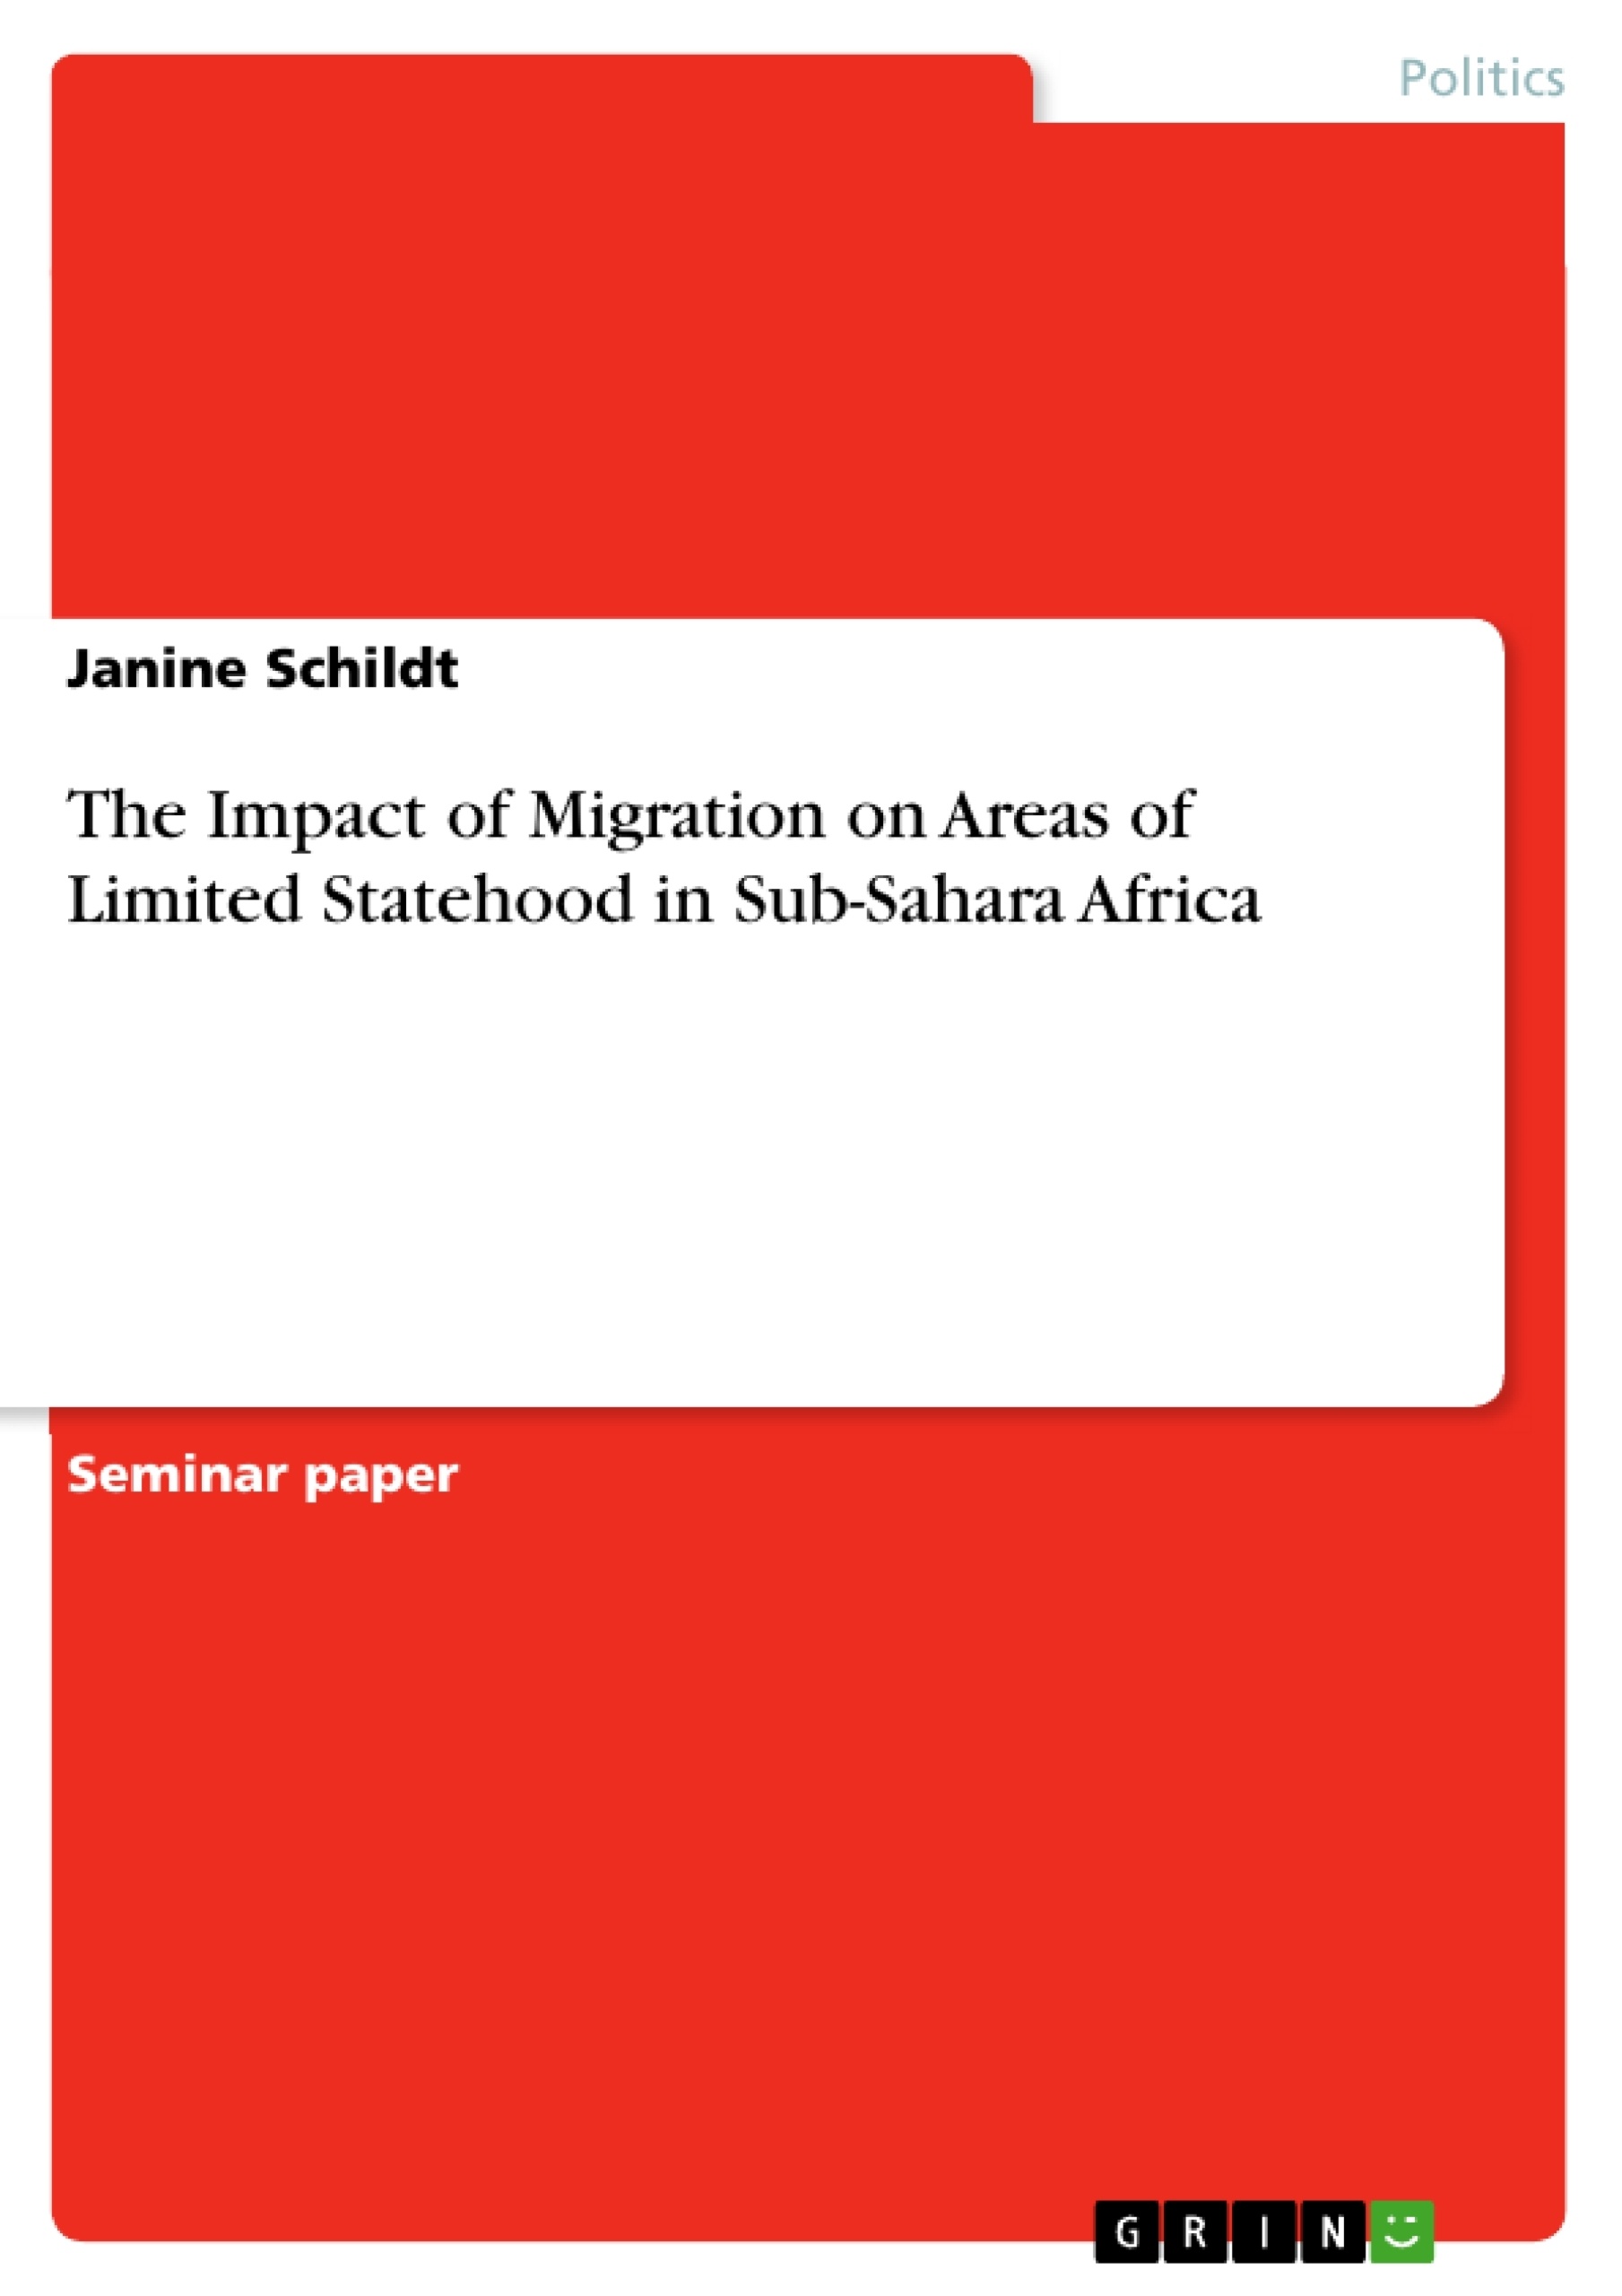 Title: The Impact of Migration on Areas of Limited Statehood in Sub-Sahara Africa